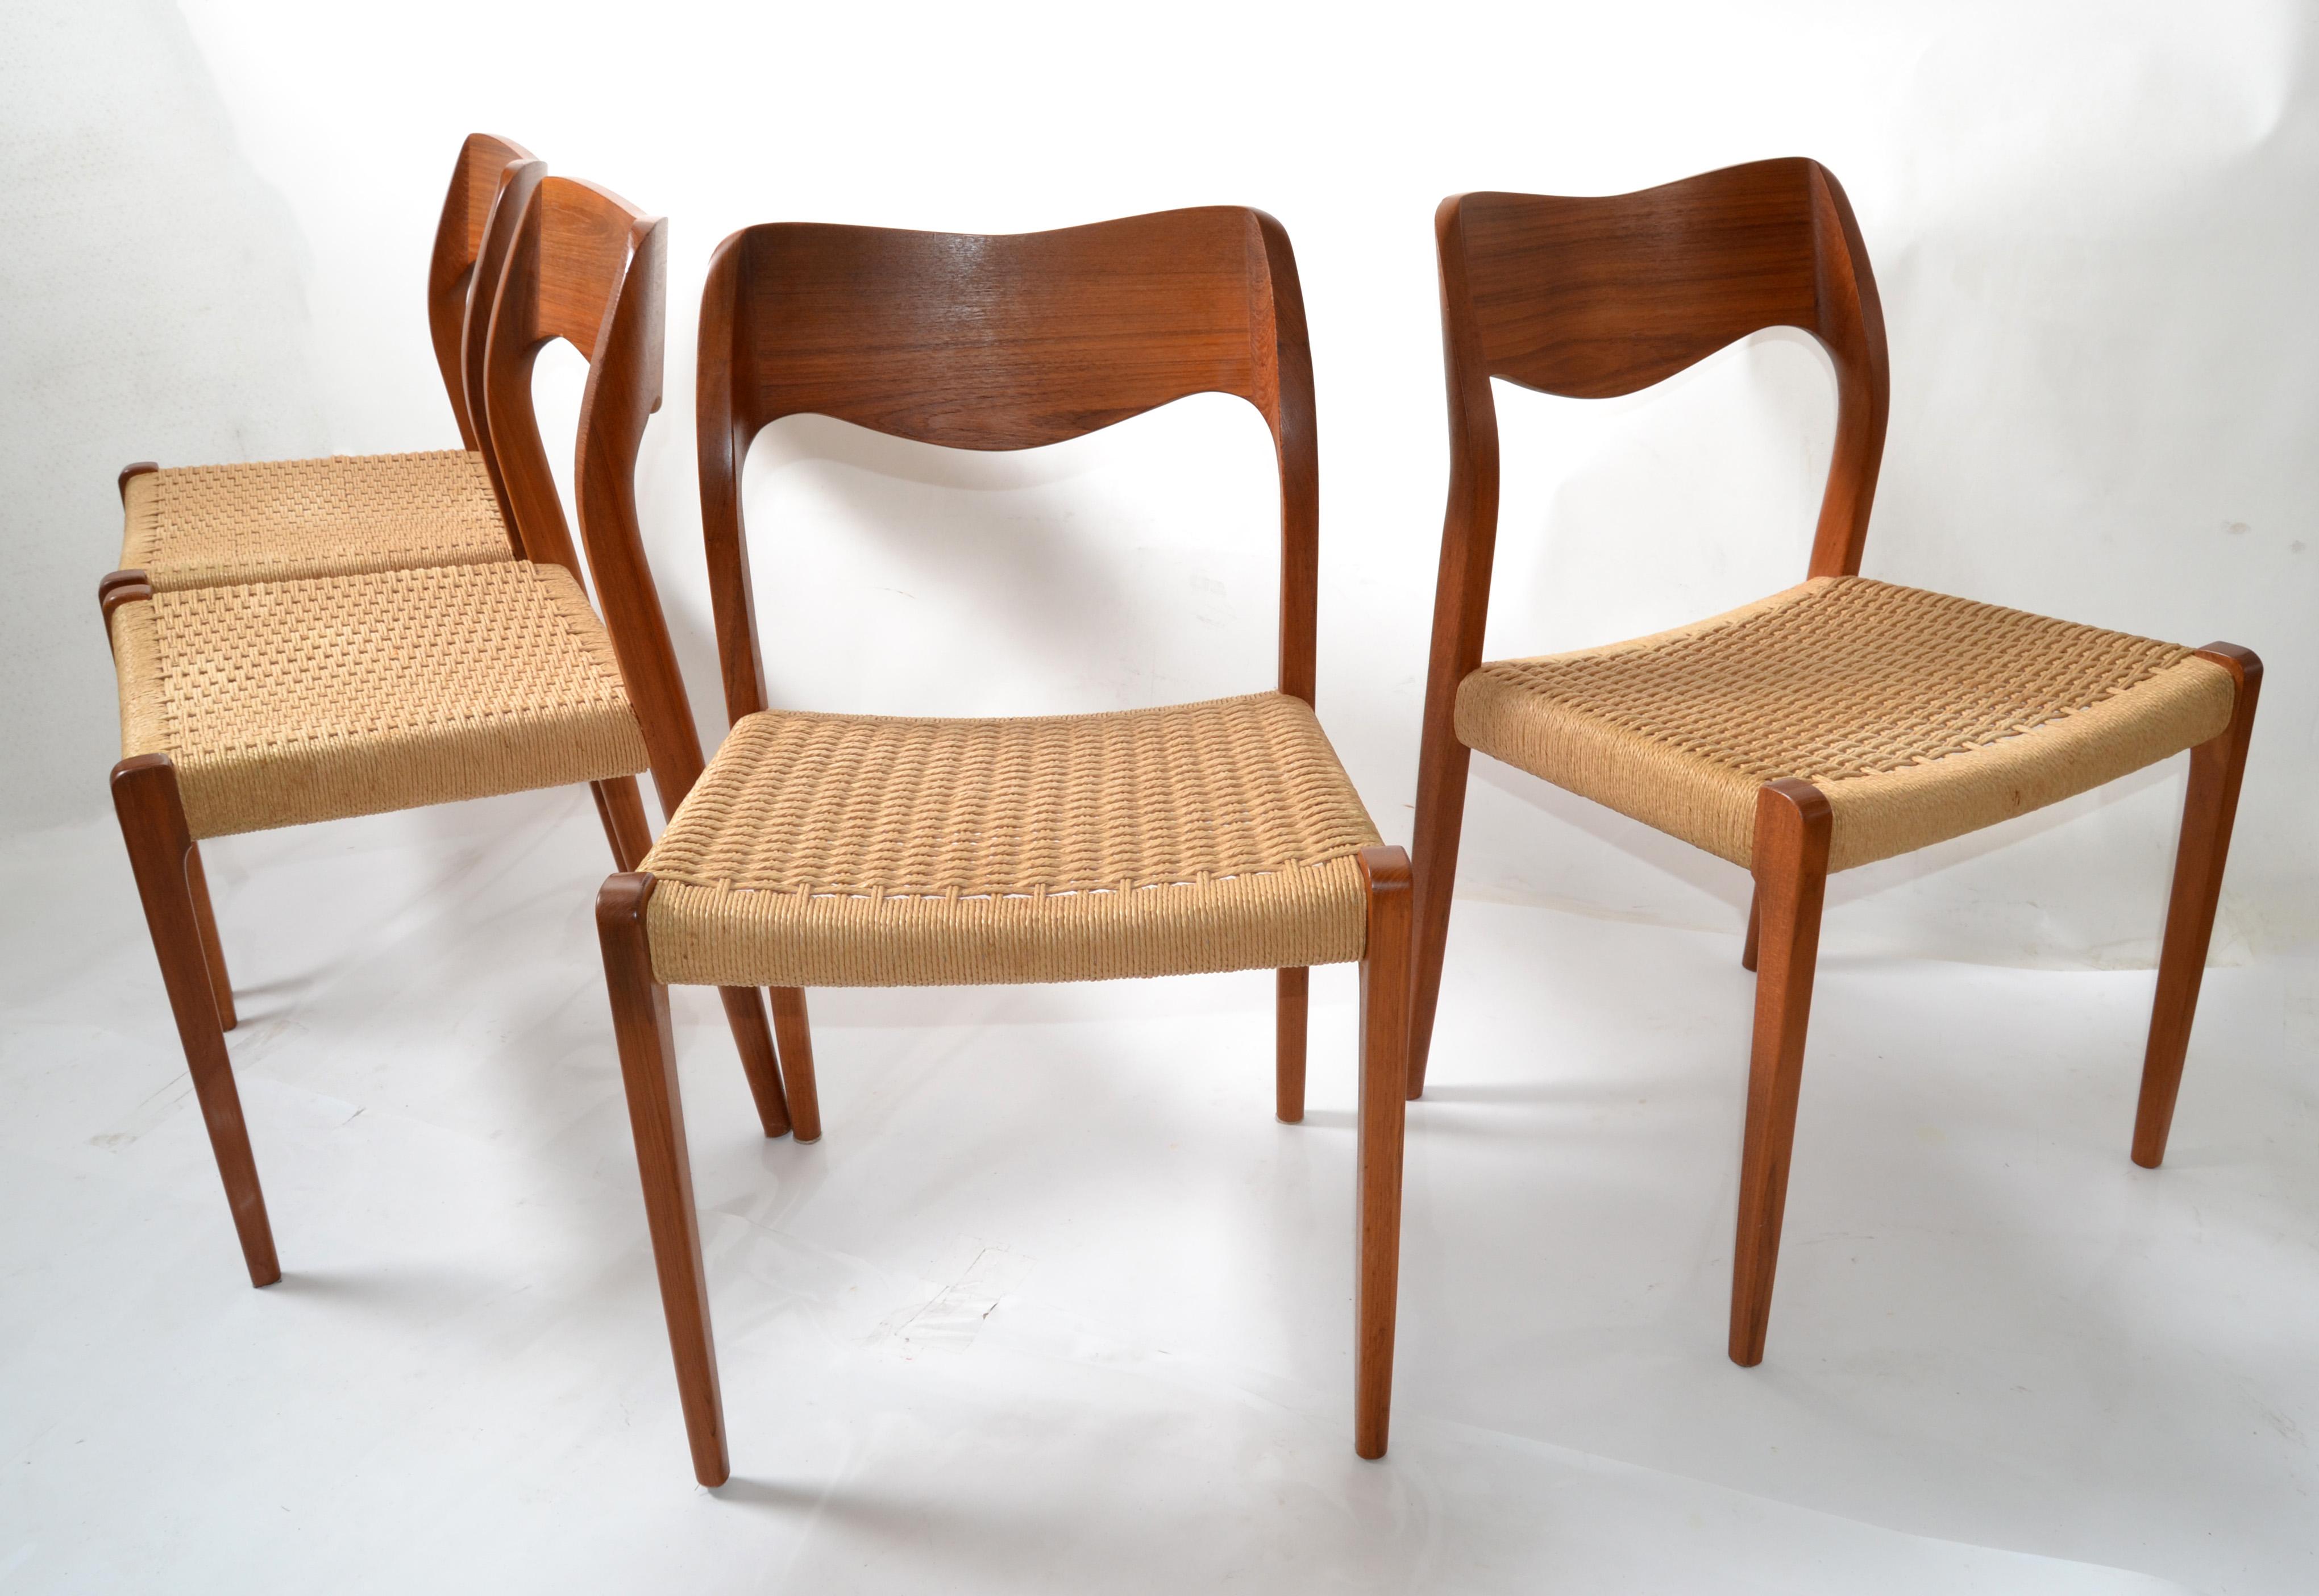 Late 20th Century Set 4 Niels Møller Modell 71 Danish Teak Dining Chairs Papercord by J.L. Møllers